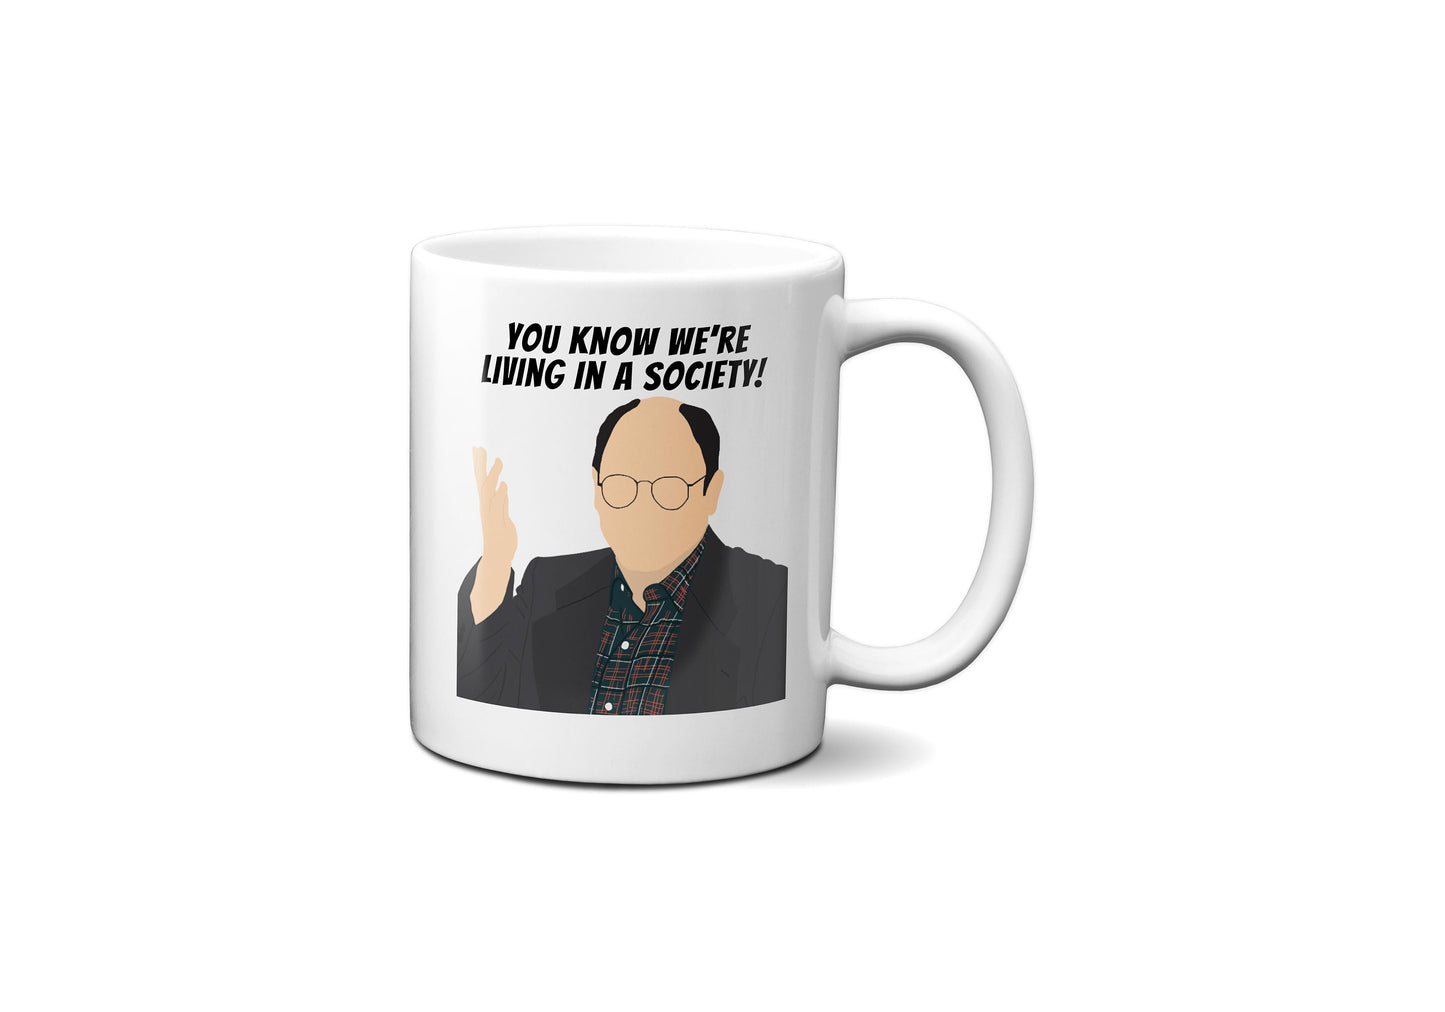 You Know We're Living In a Society! | George Costanza Mug | Seinfeld Mug